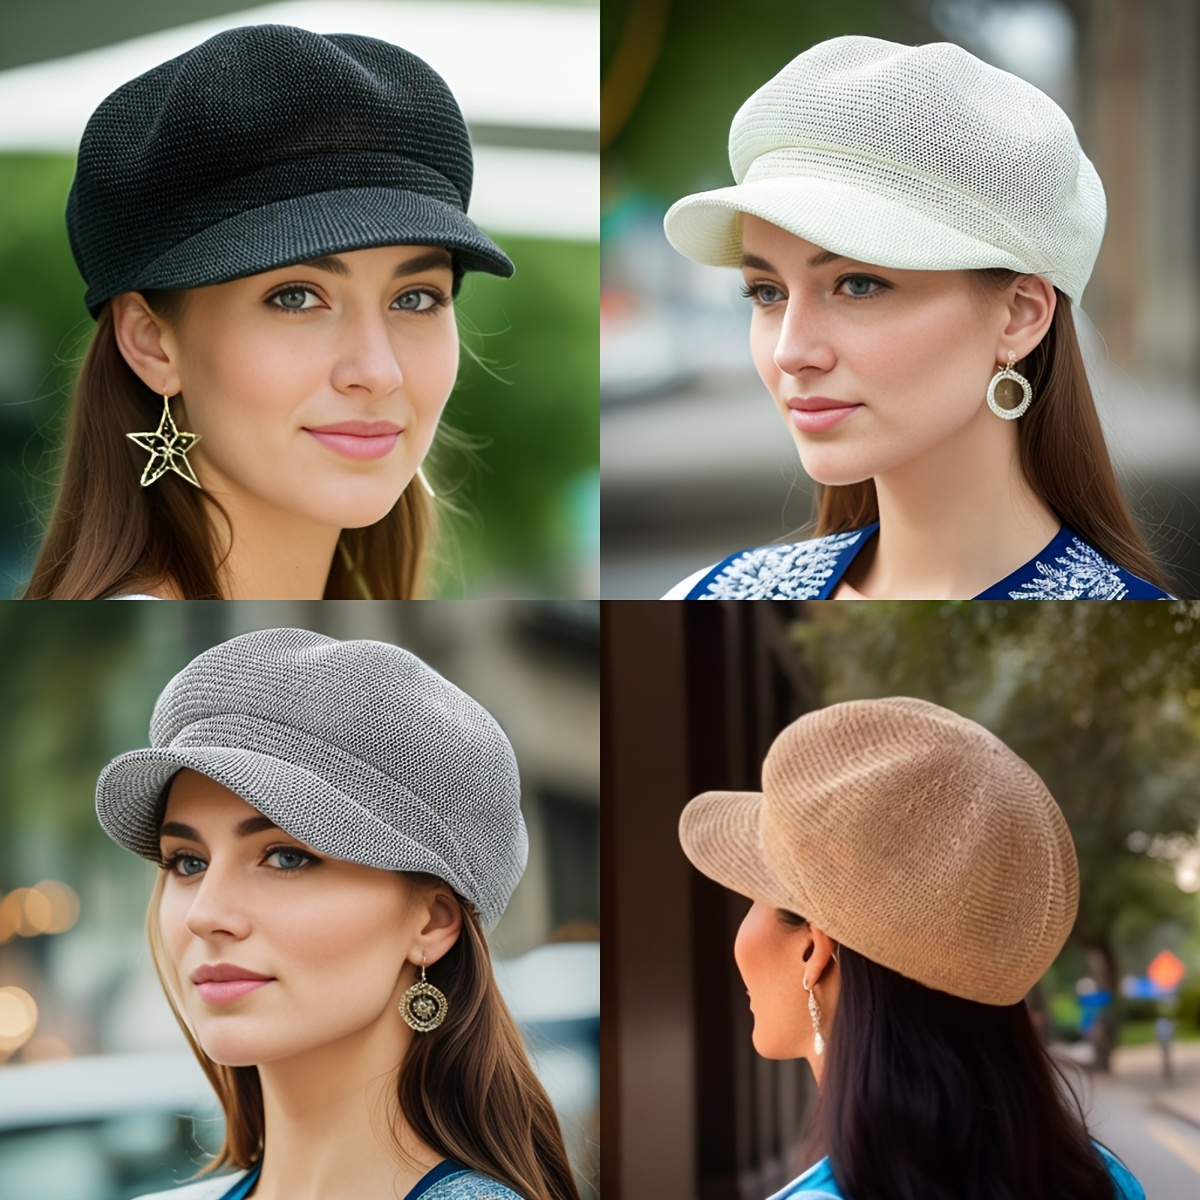 

Womens Newsboy Cap - Trendy Beret Hat With Ventilated Mesh - Adjustable, Chic & Casual Style - A Year-round Fashion Essential For All Seasons